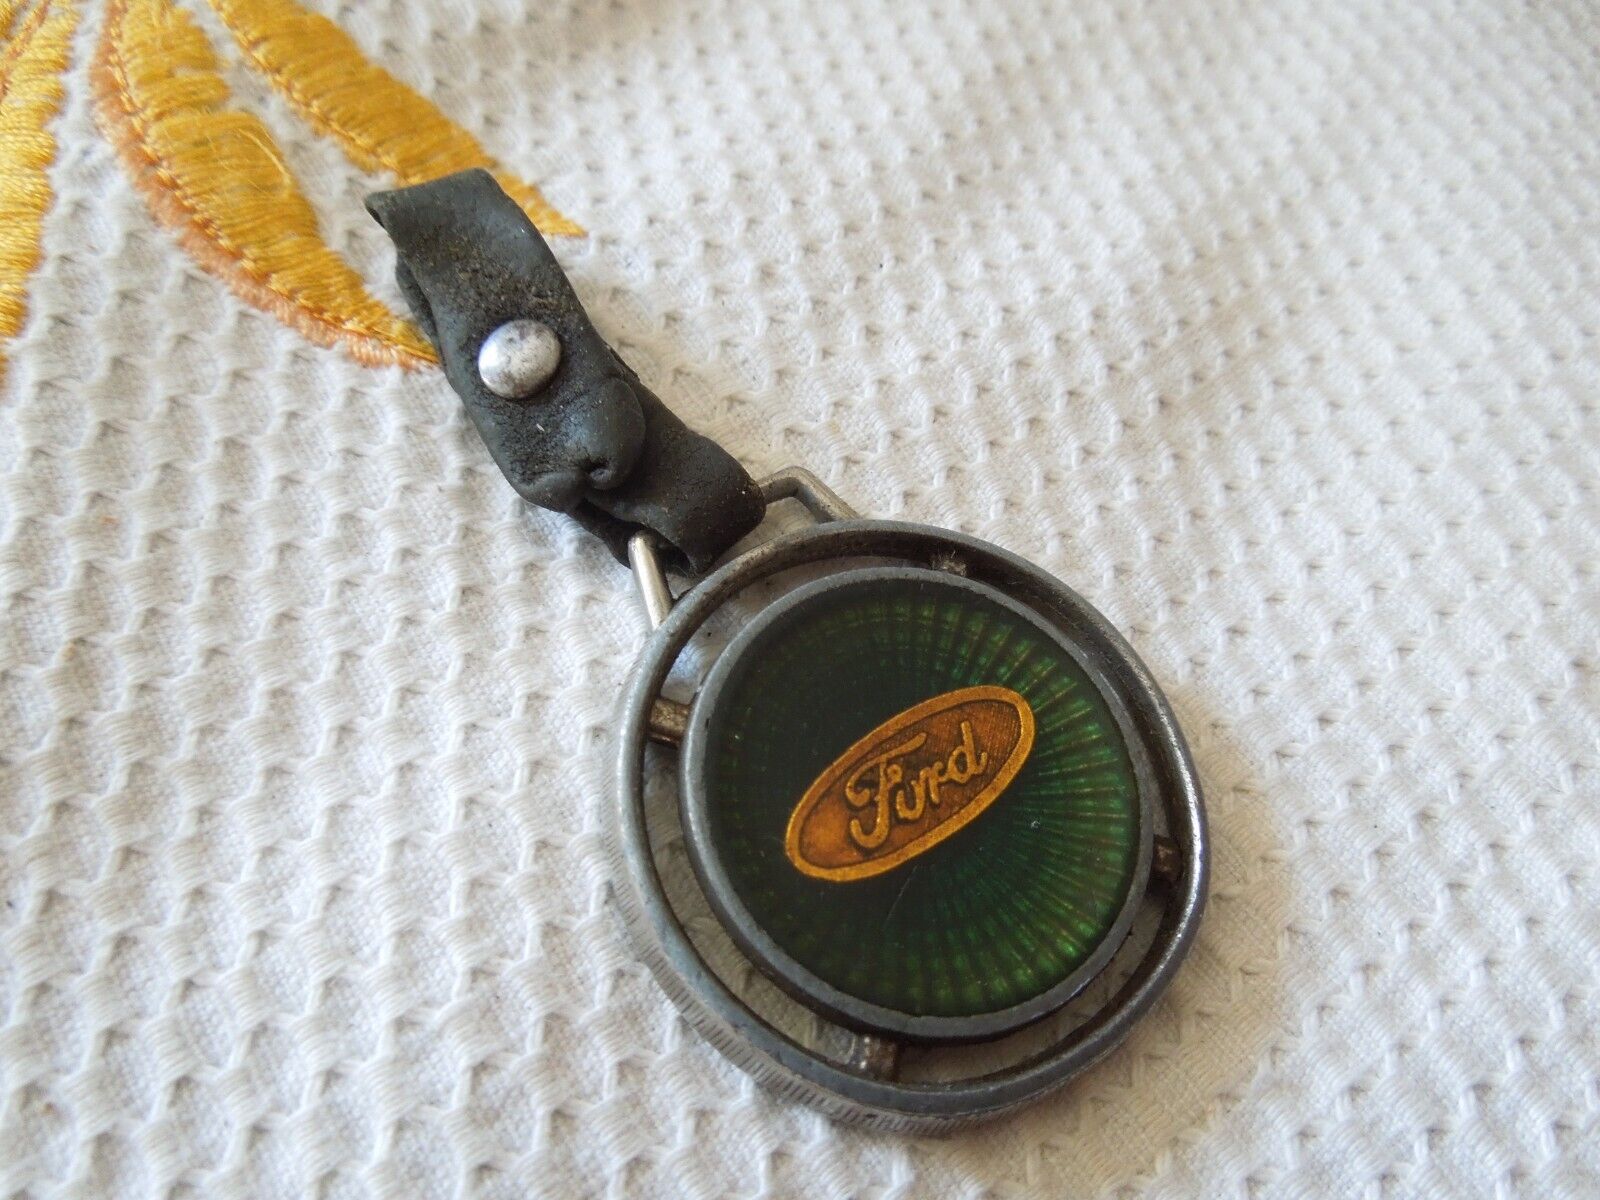 Vintage FORD 1960'S ORIGINAL CROWN STAMPED LEATHER KEY FOB KEY CHAIN RARE FIND